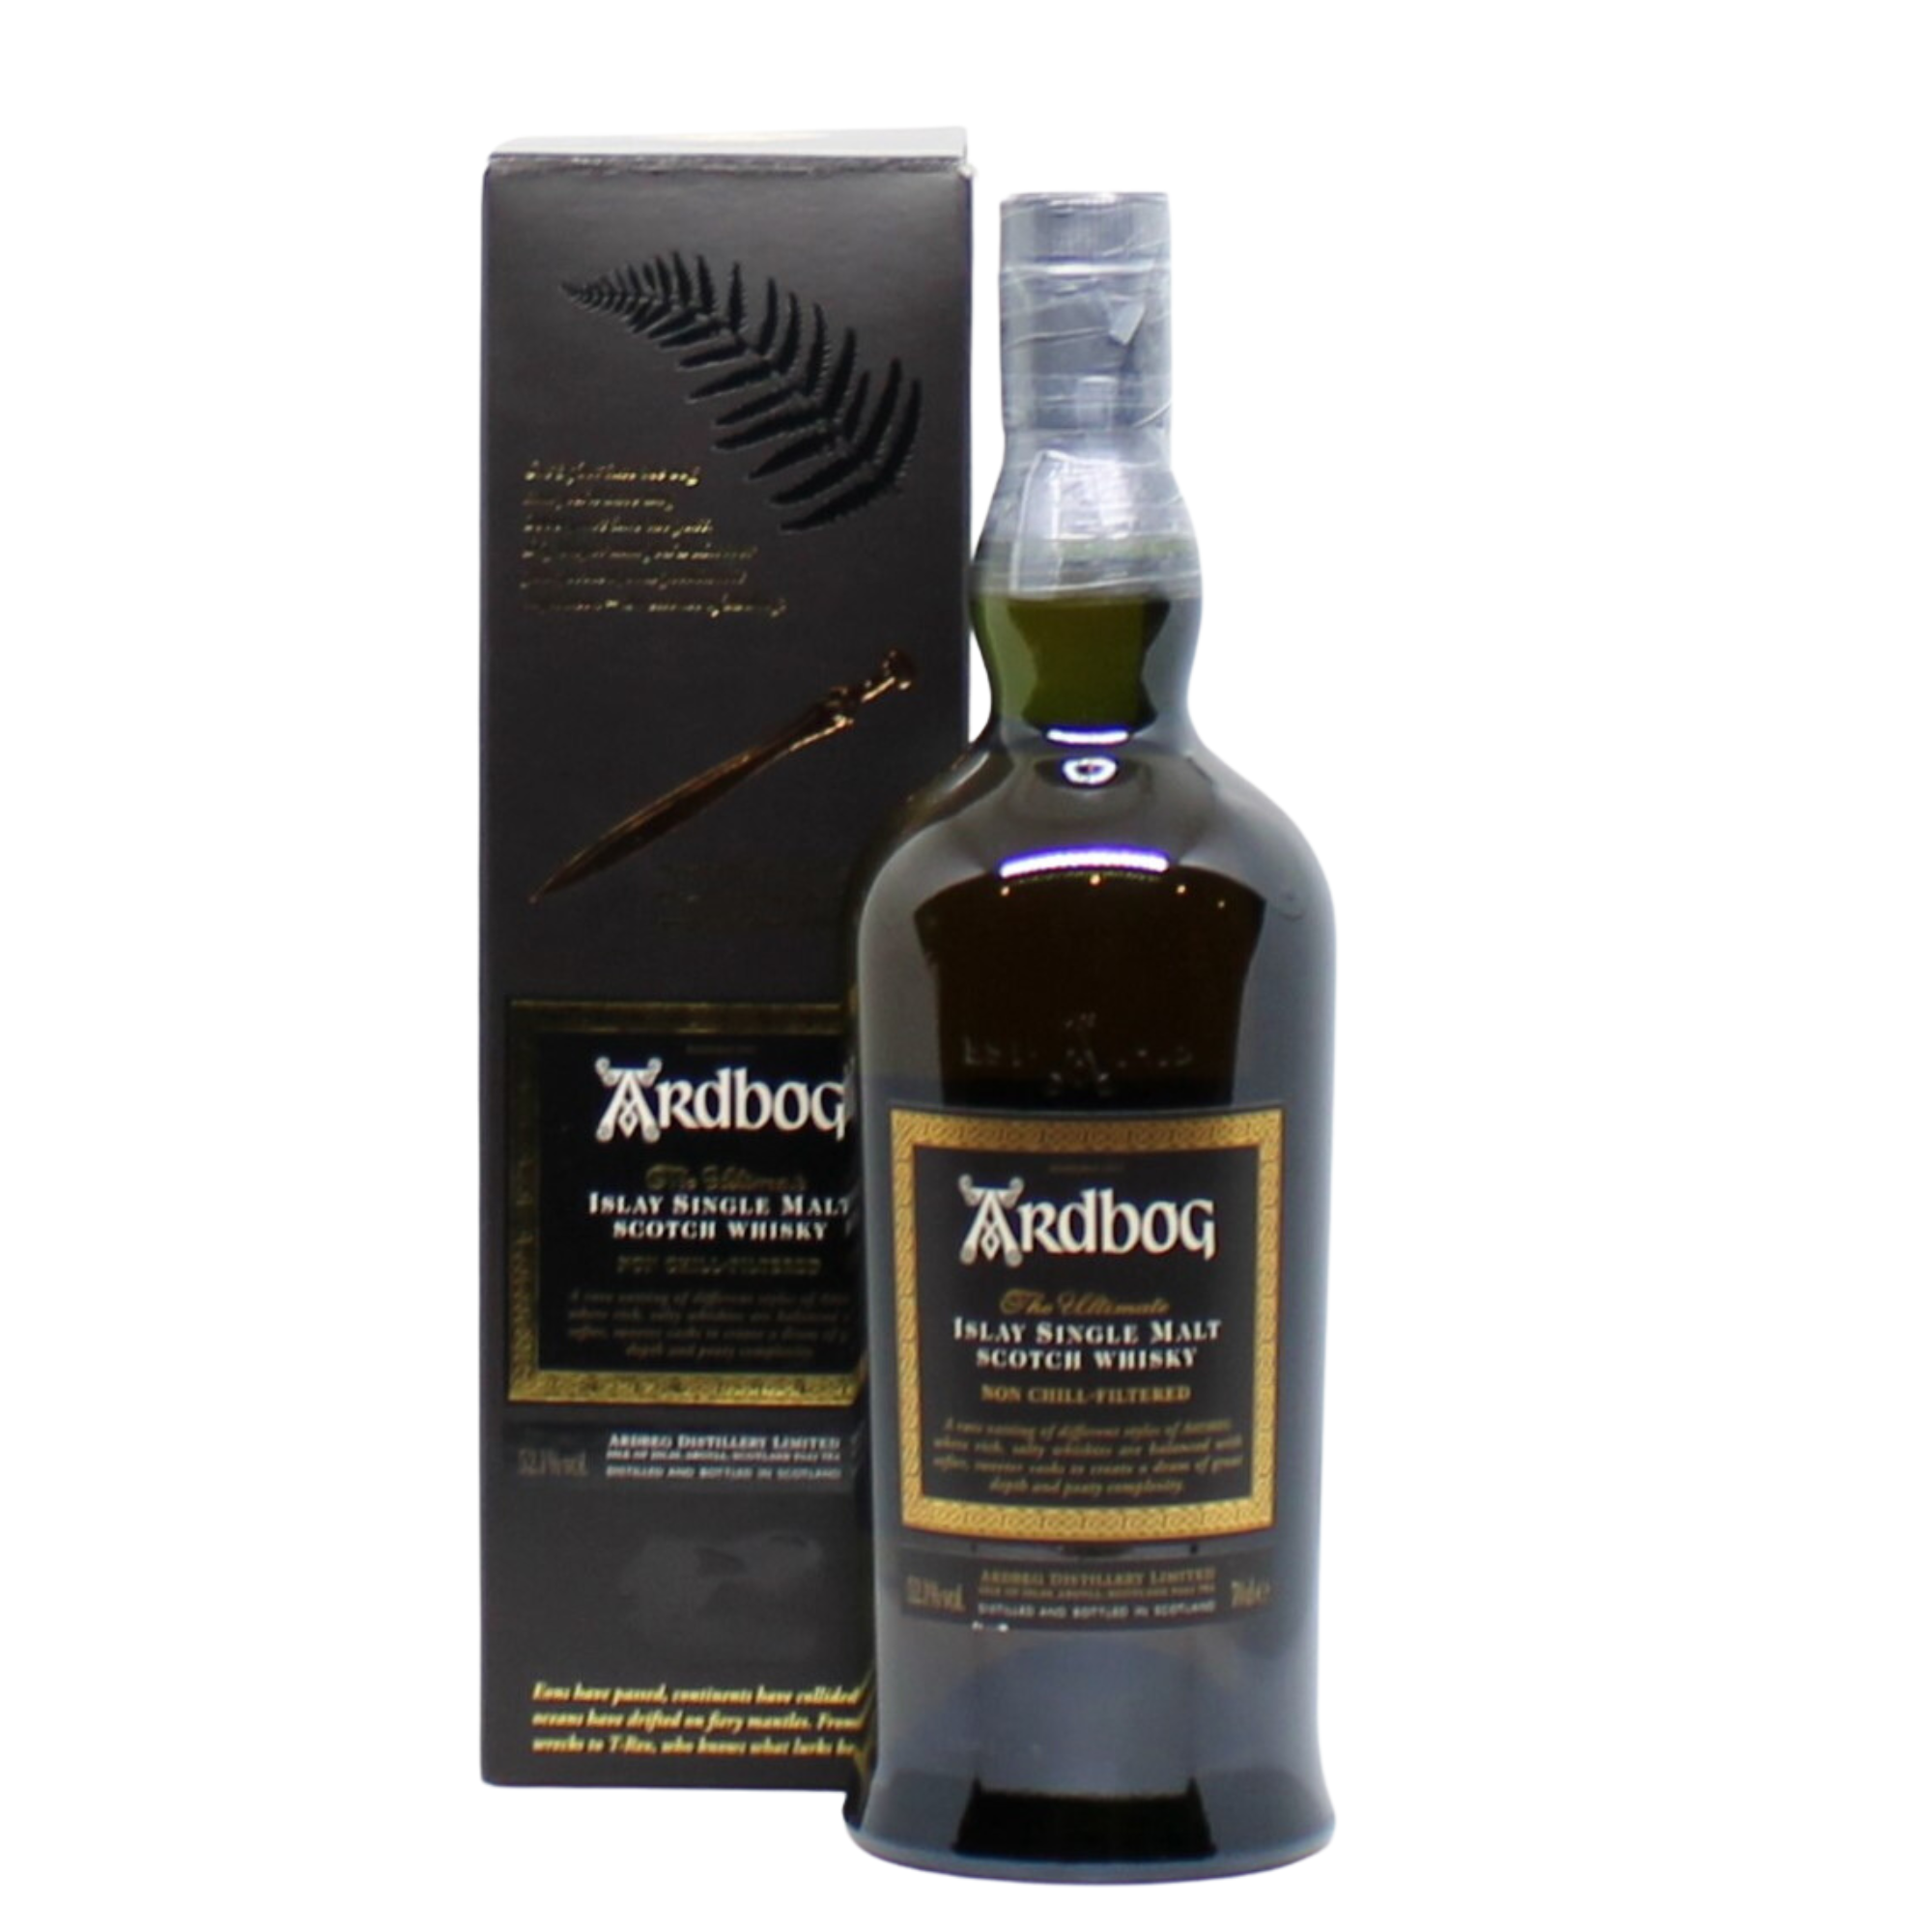 A limited edition Ardbeg released during the 2013 Fèis Ìle whisky festival. Aged in a combination of bourbon as well as some Manzanilla sherry casks, this is reportedly a vatting of 10 Year aged whisky and was produced for the 'Ardbeg Day', celebrated around the world on 1st June 2013. About 13,000 bottles were released at an impressive ABV of 52.1%.